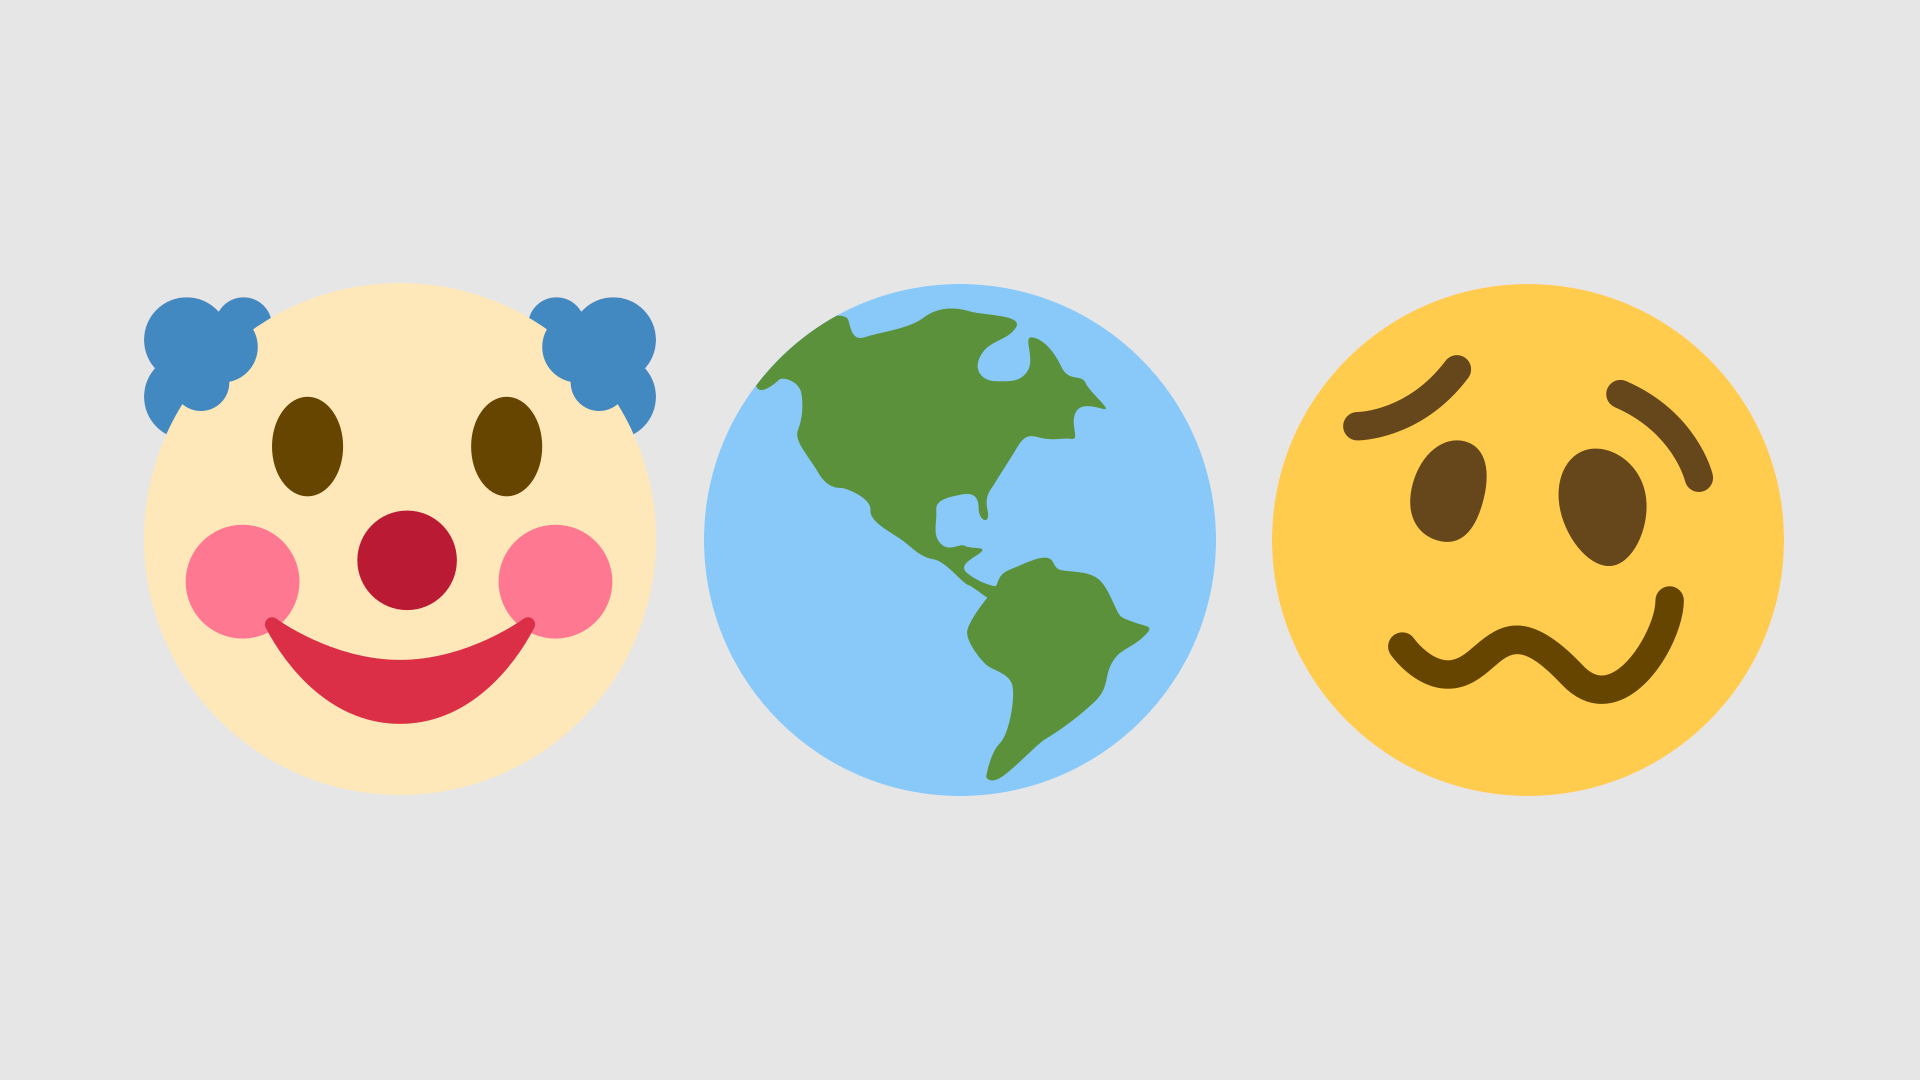 Emojis representing a silly and confused population